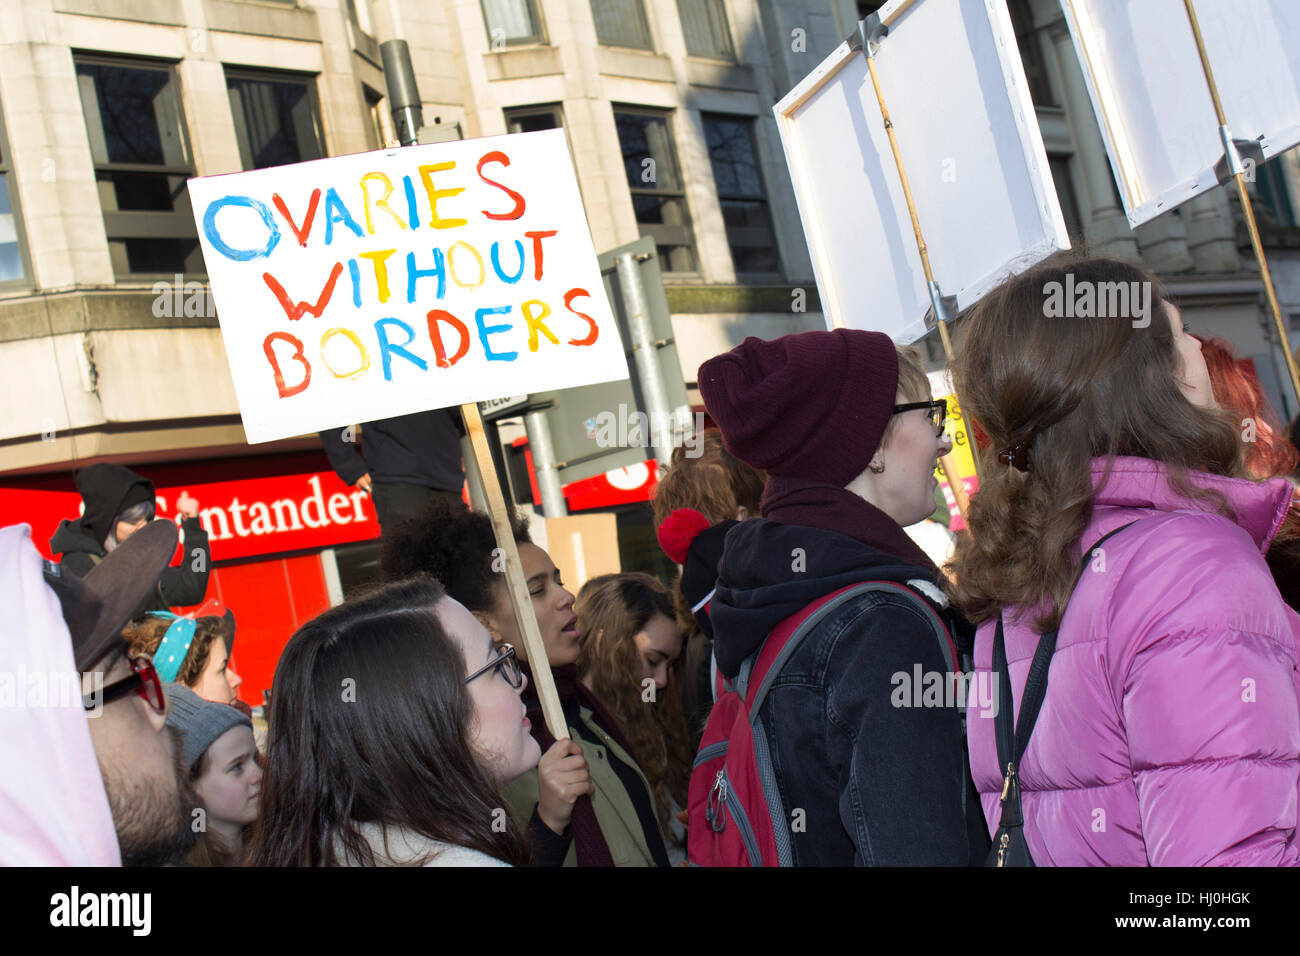 Cardiff, Wales. 21st Jan, 2017. Protesters taking part in the Women's March on Queen Street, as part of a movement against Donald Trump. Credit: Aimee Herd/Alamy Live News Stock Photo